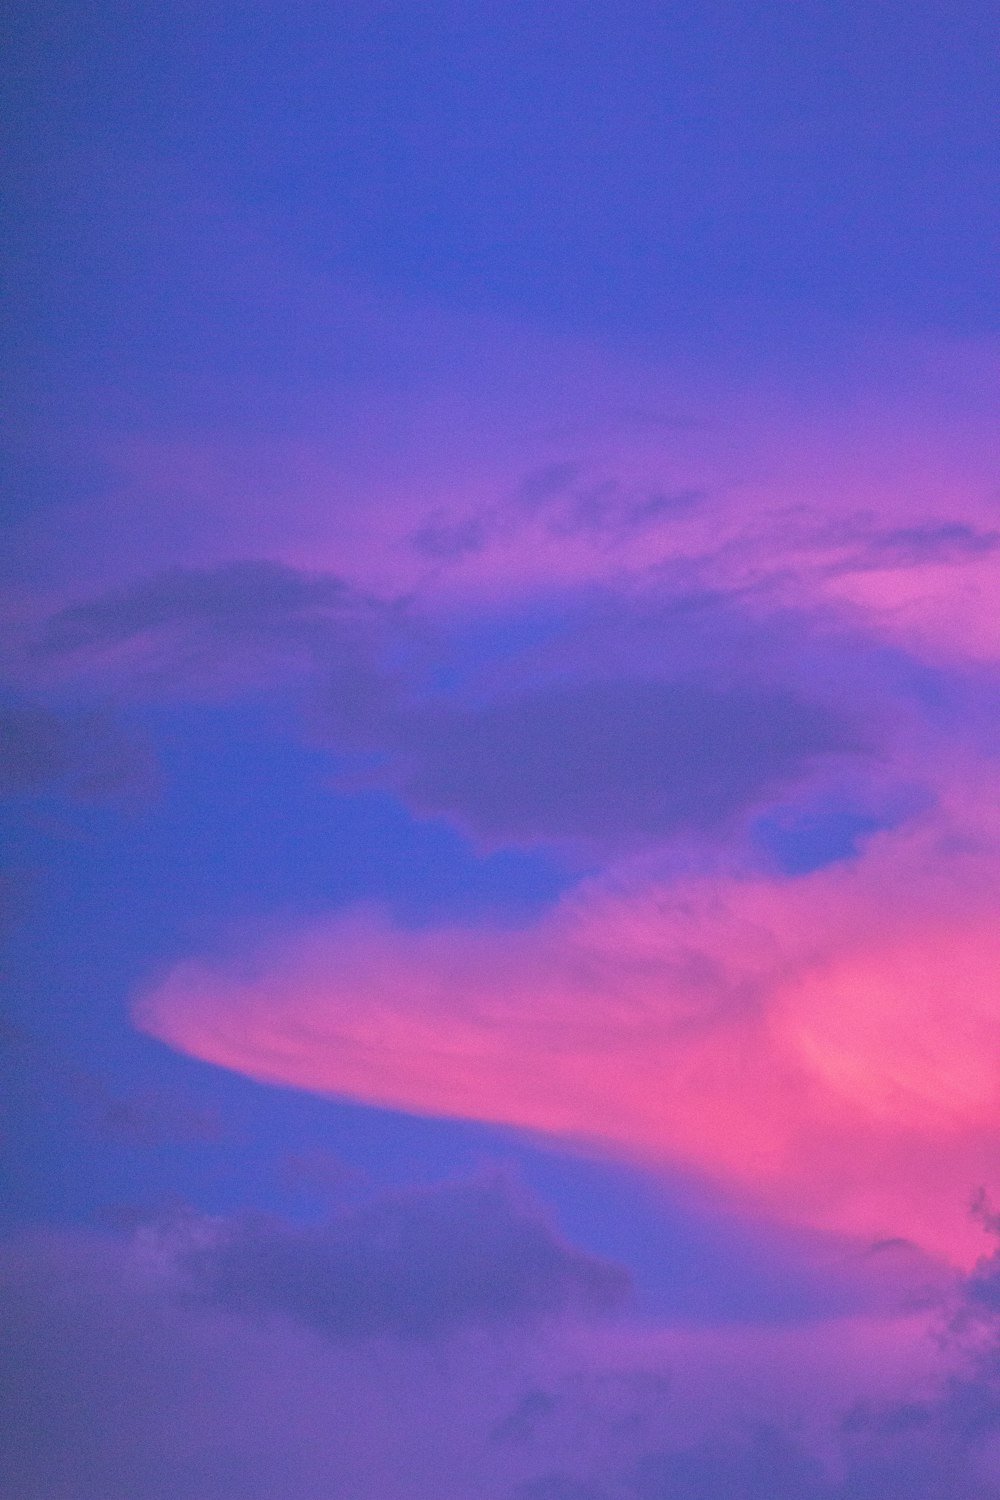 purple and pink clouds during night time